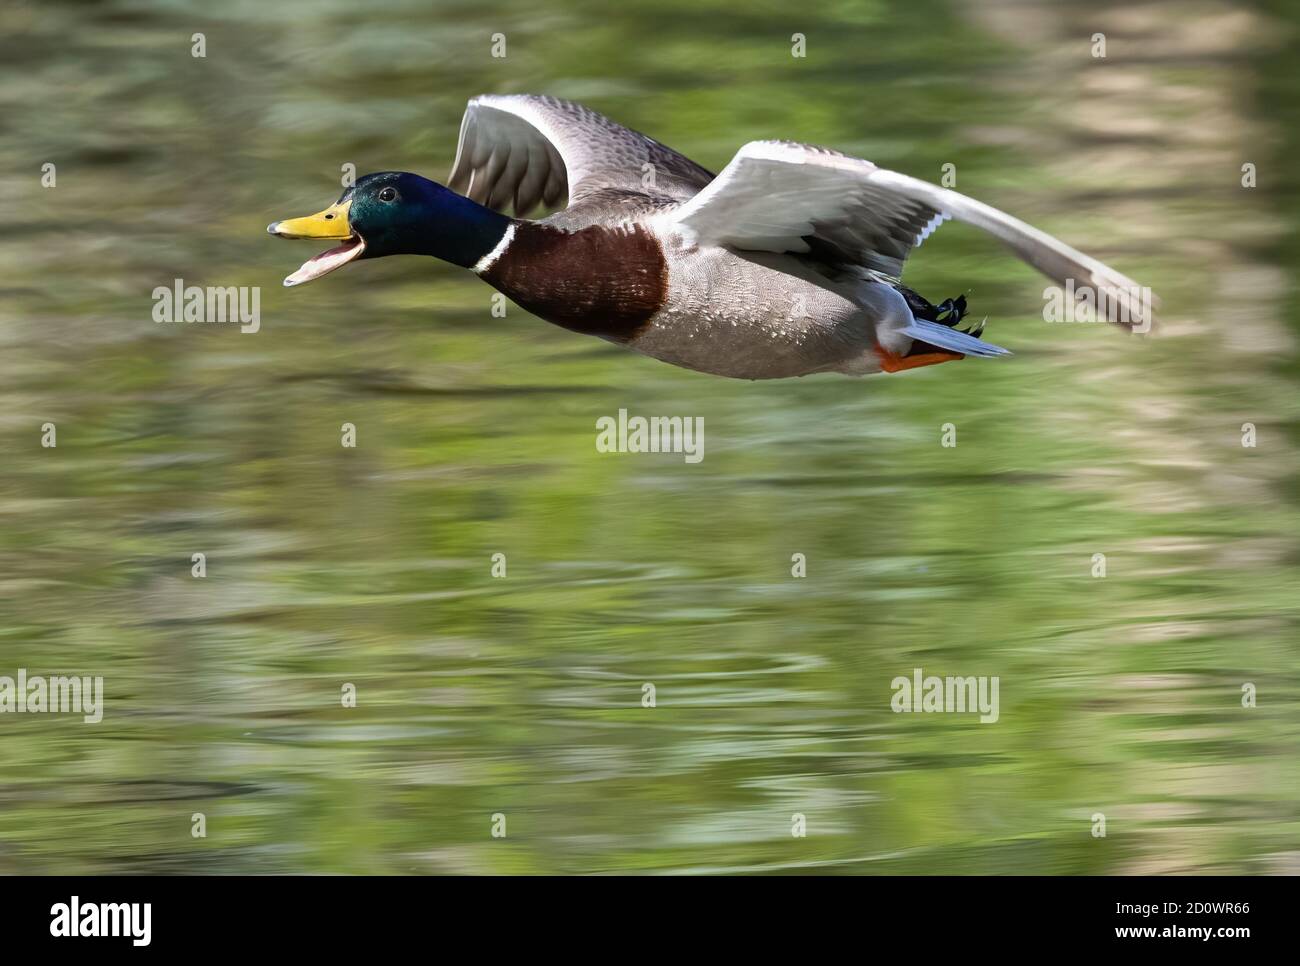 A flying and quacking Mallard duck approaching at very close range. Stock Photo